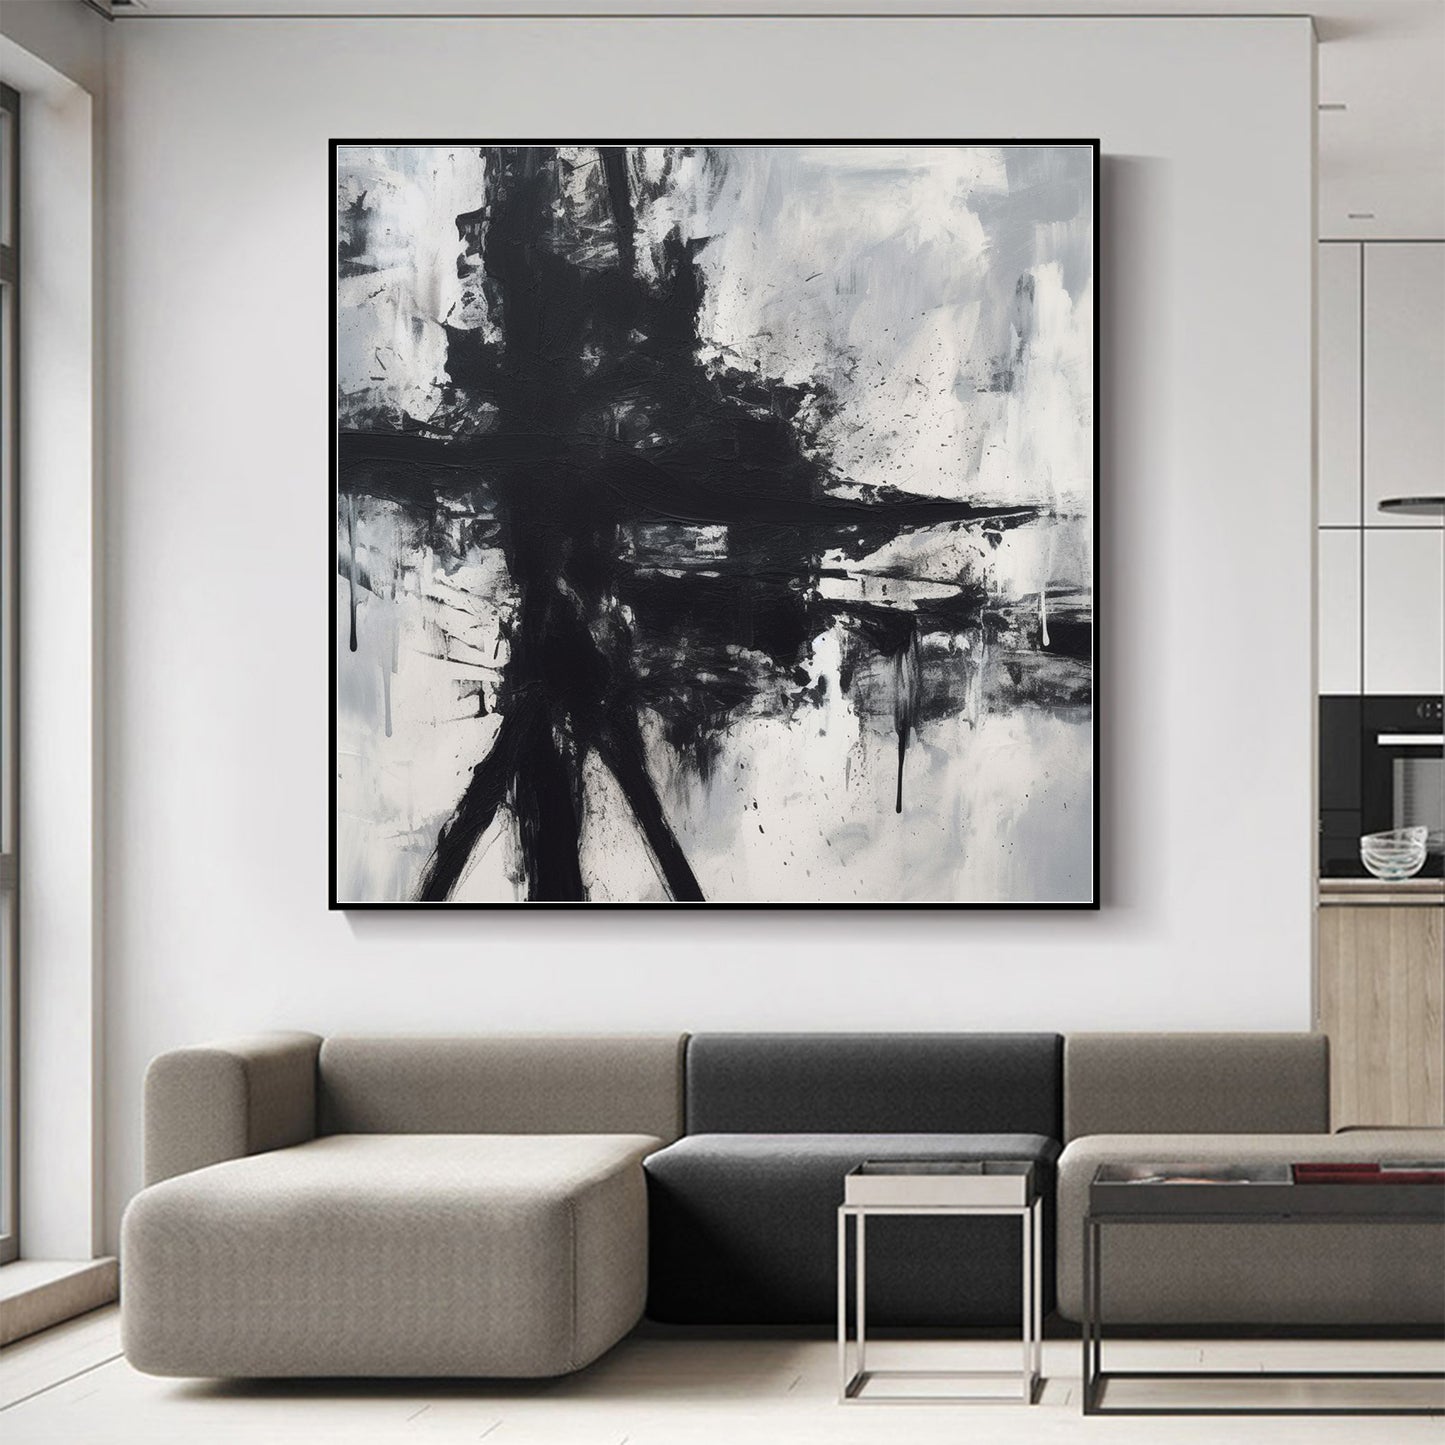 Handmade Paintings for Bedroom abstract Black and White Wall Art #Kb232BW93